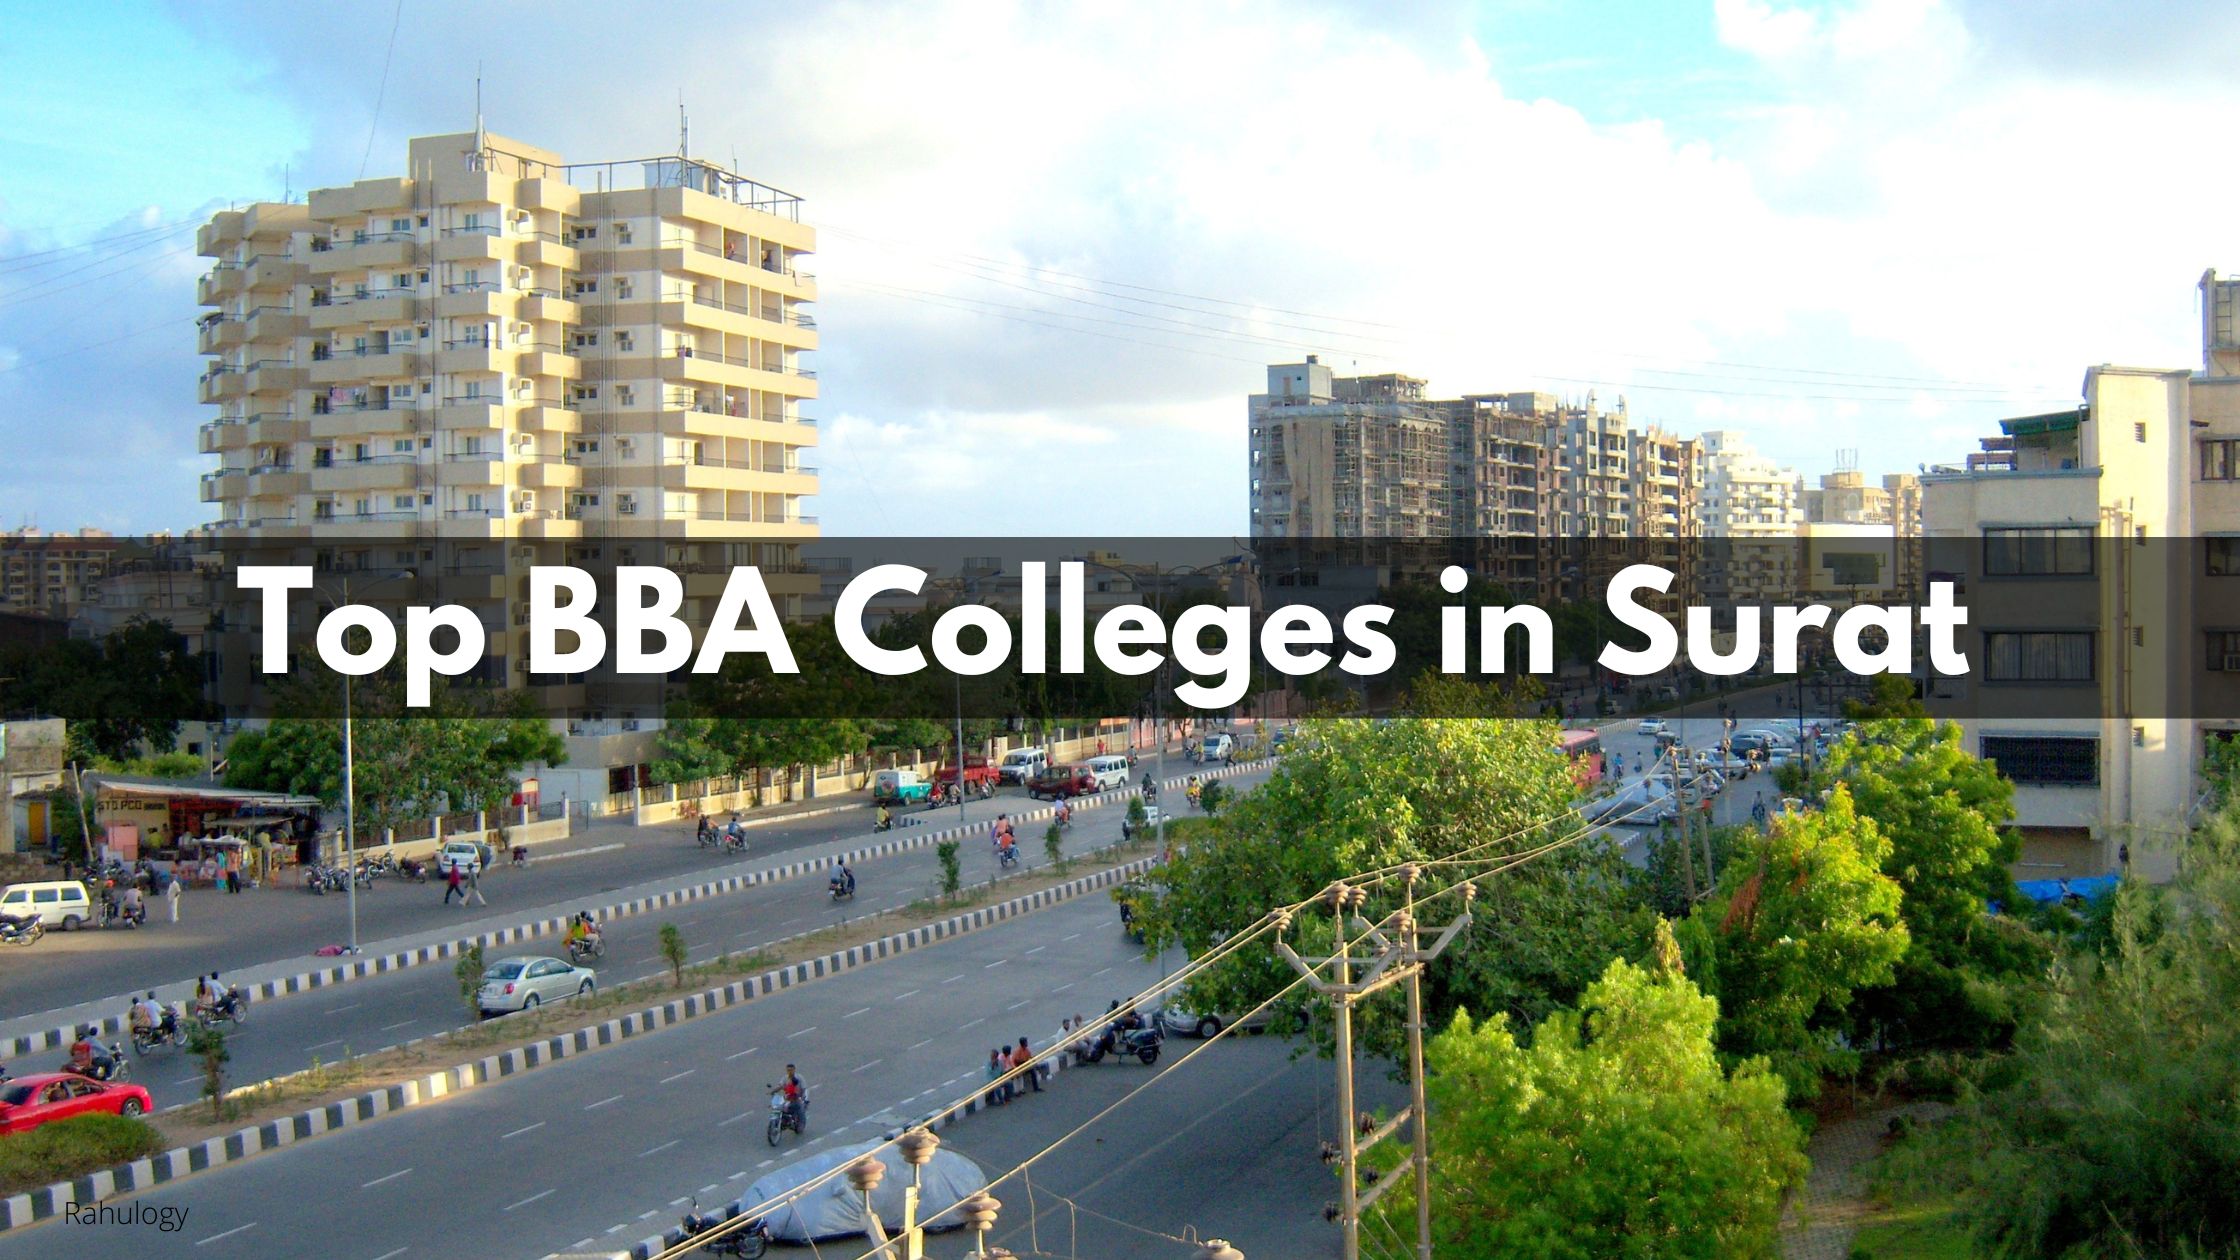 BBA Colleges in Surat